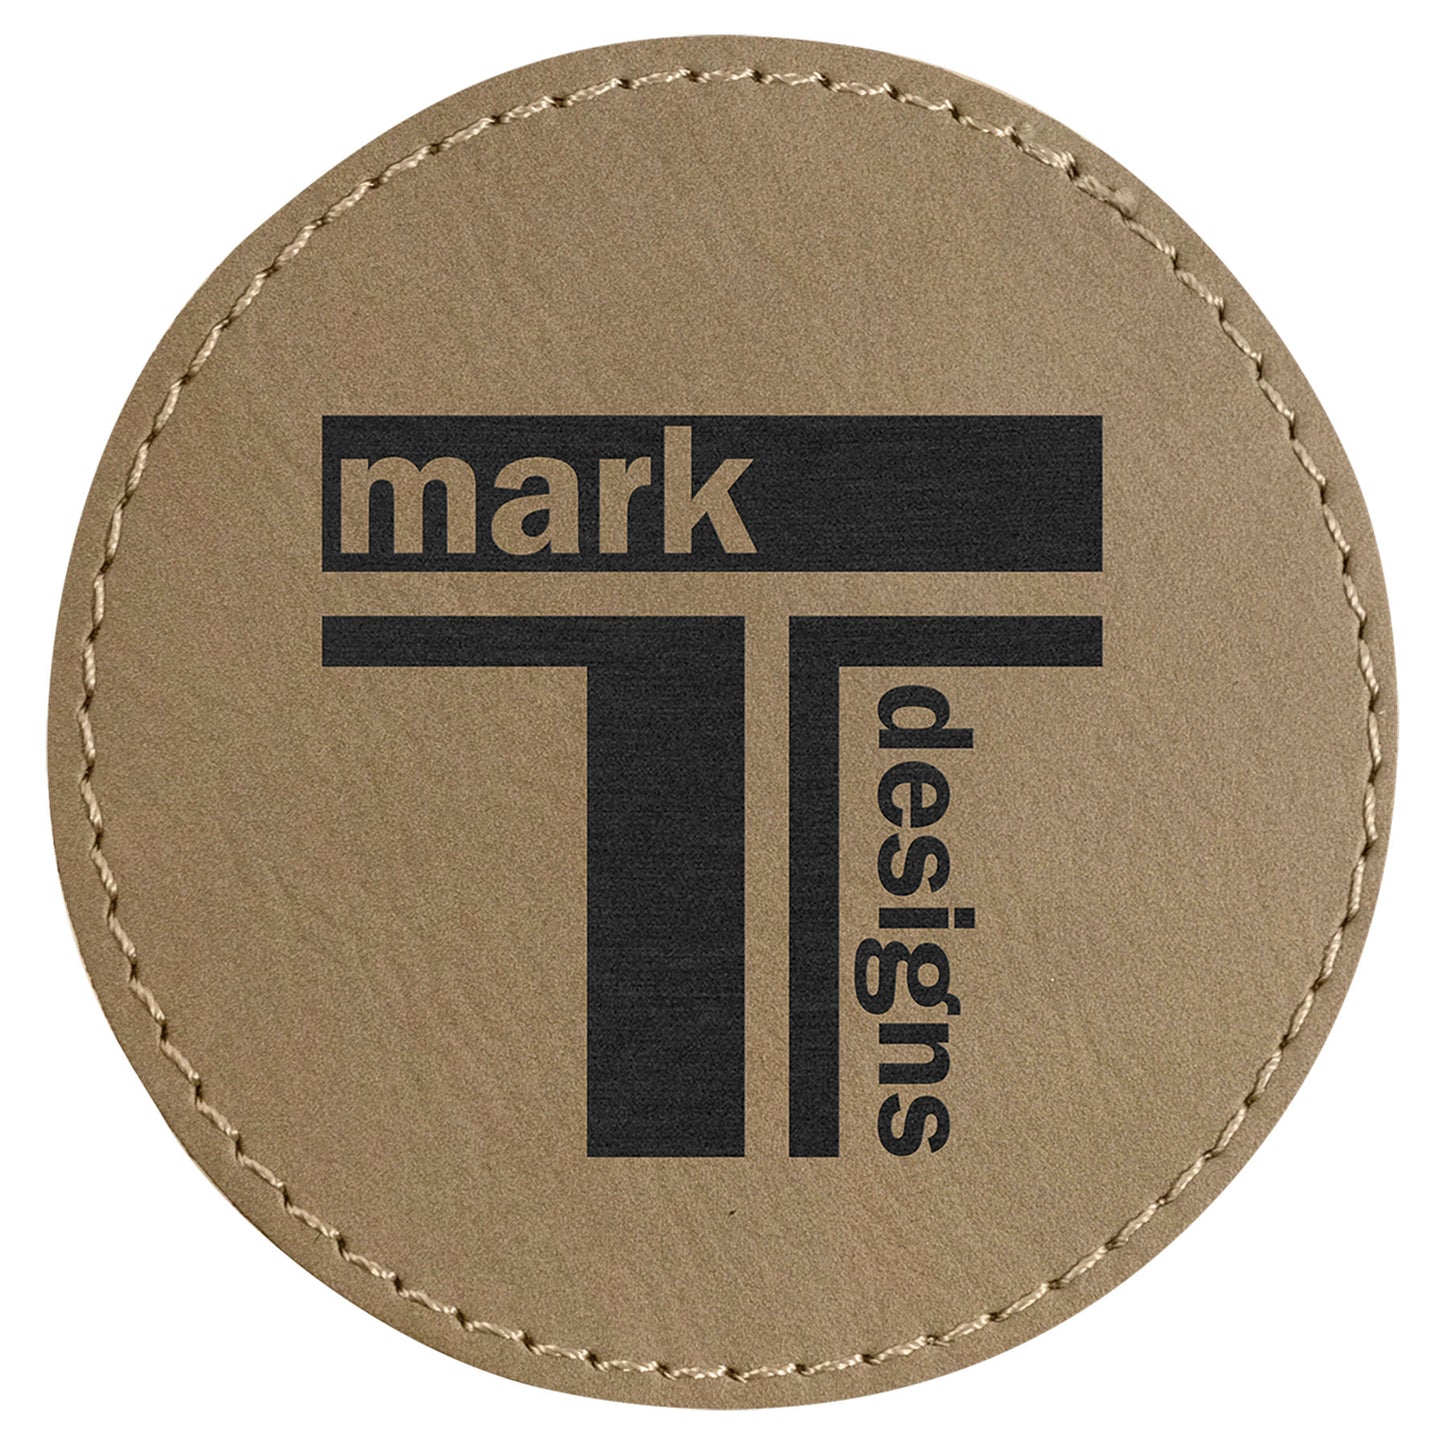 Leatherette Personalized - Square Patches w/adhesive – 525 Laser